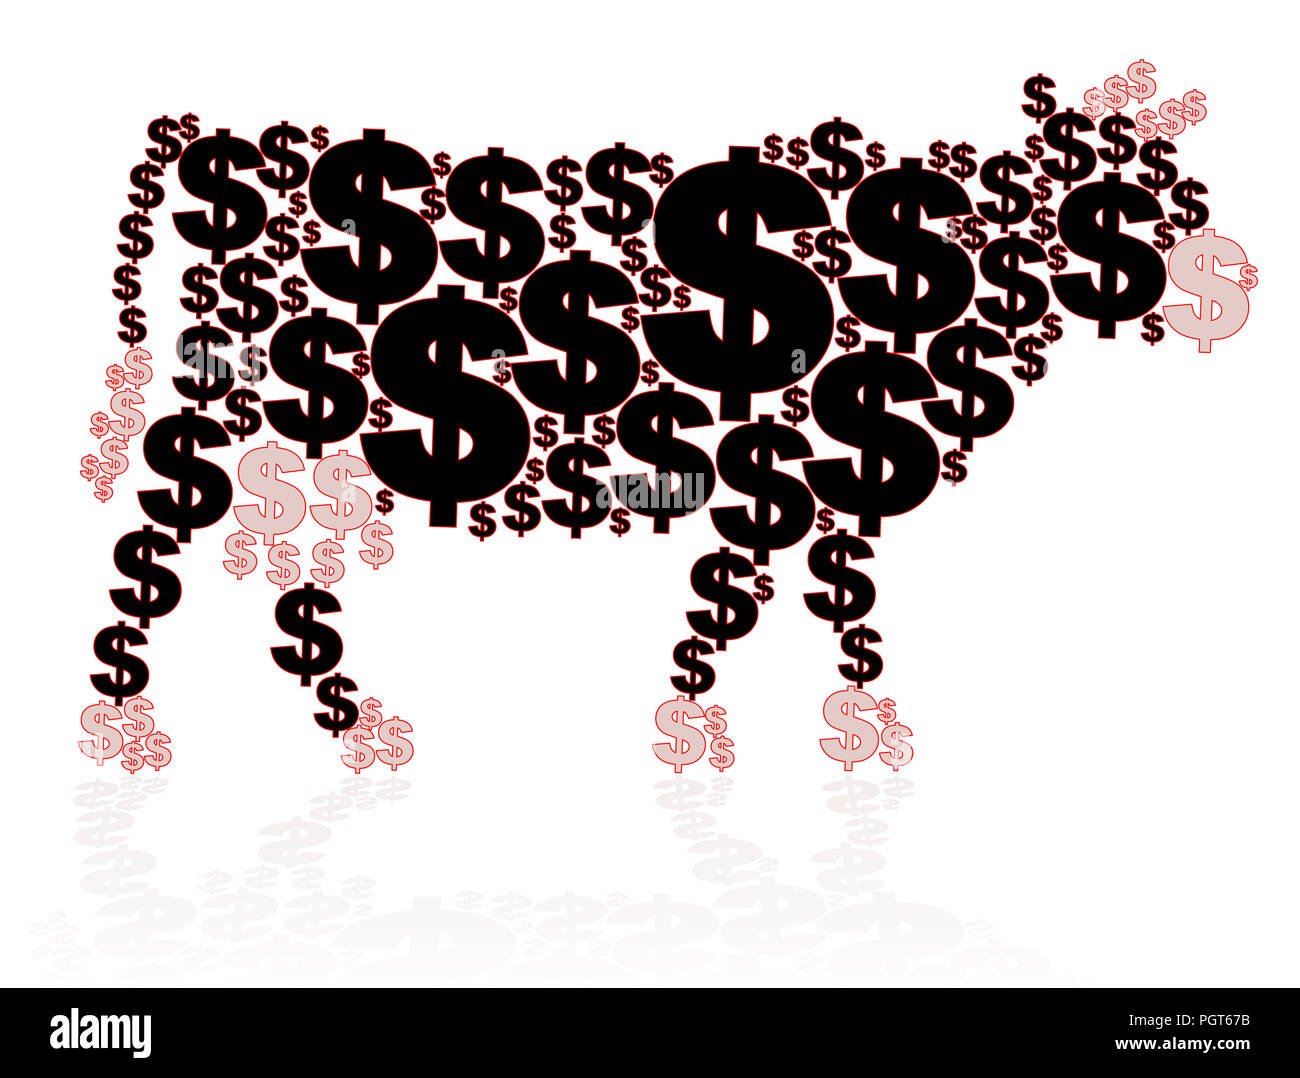 CASH COW, business metaphor, dollars that shape a cow - illustration on white background. Stock Photo